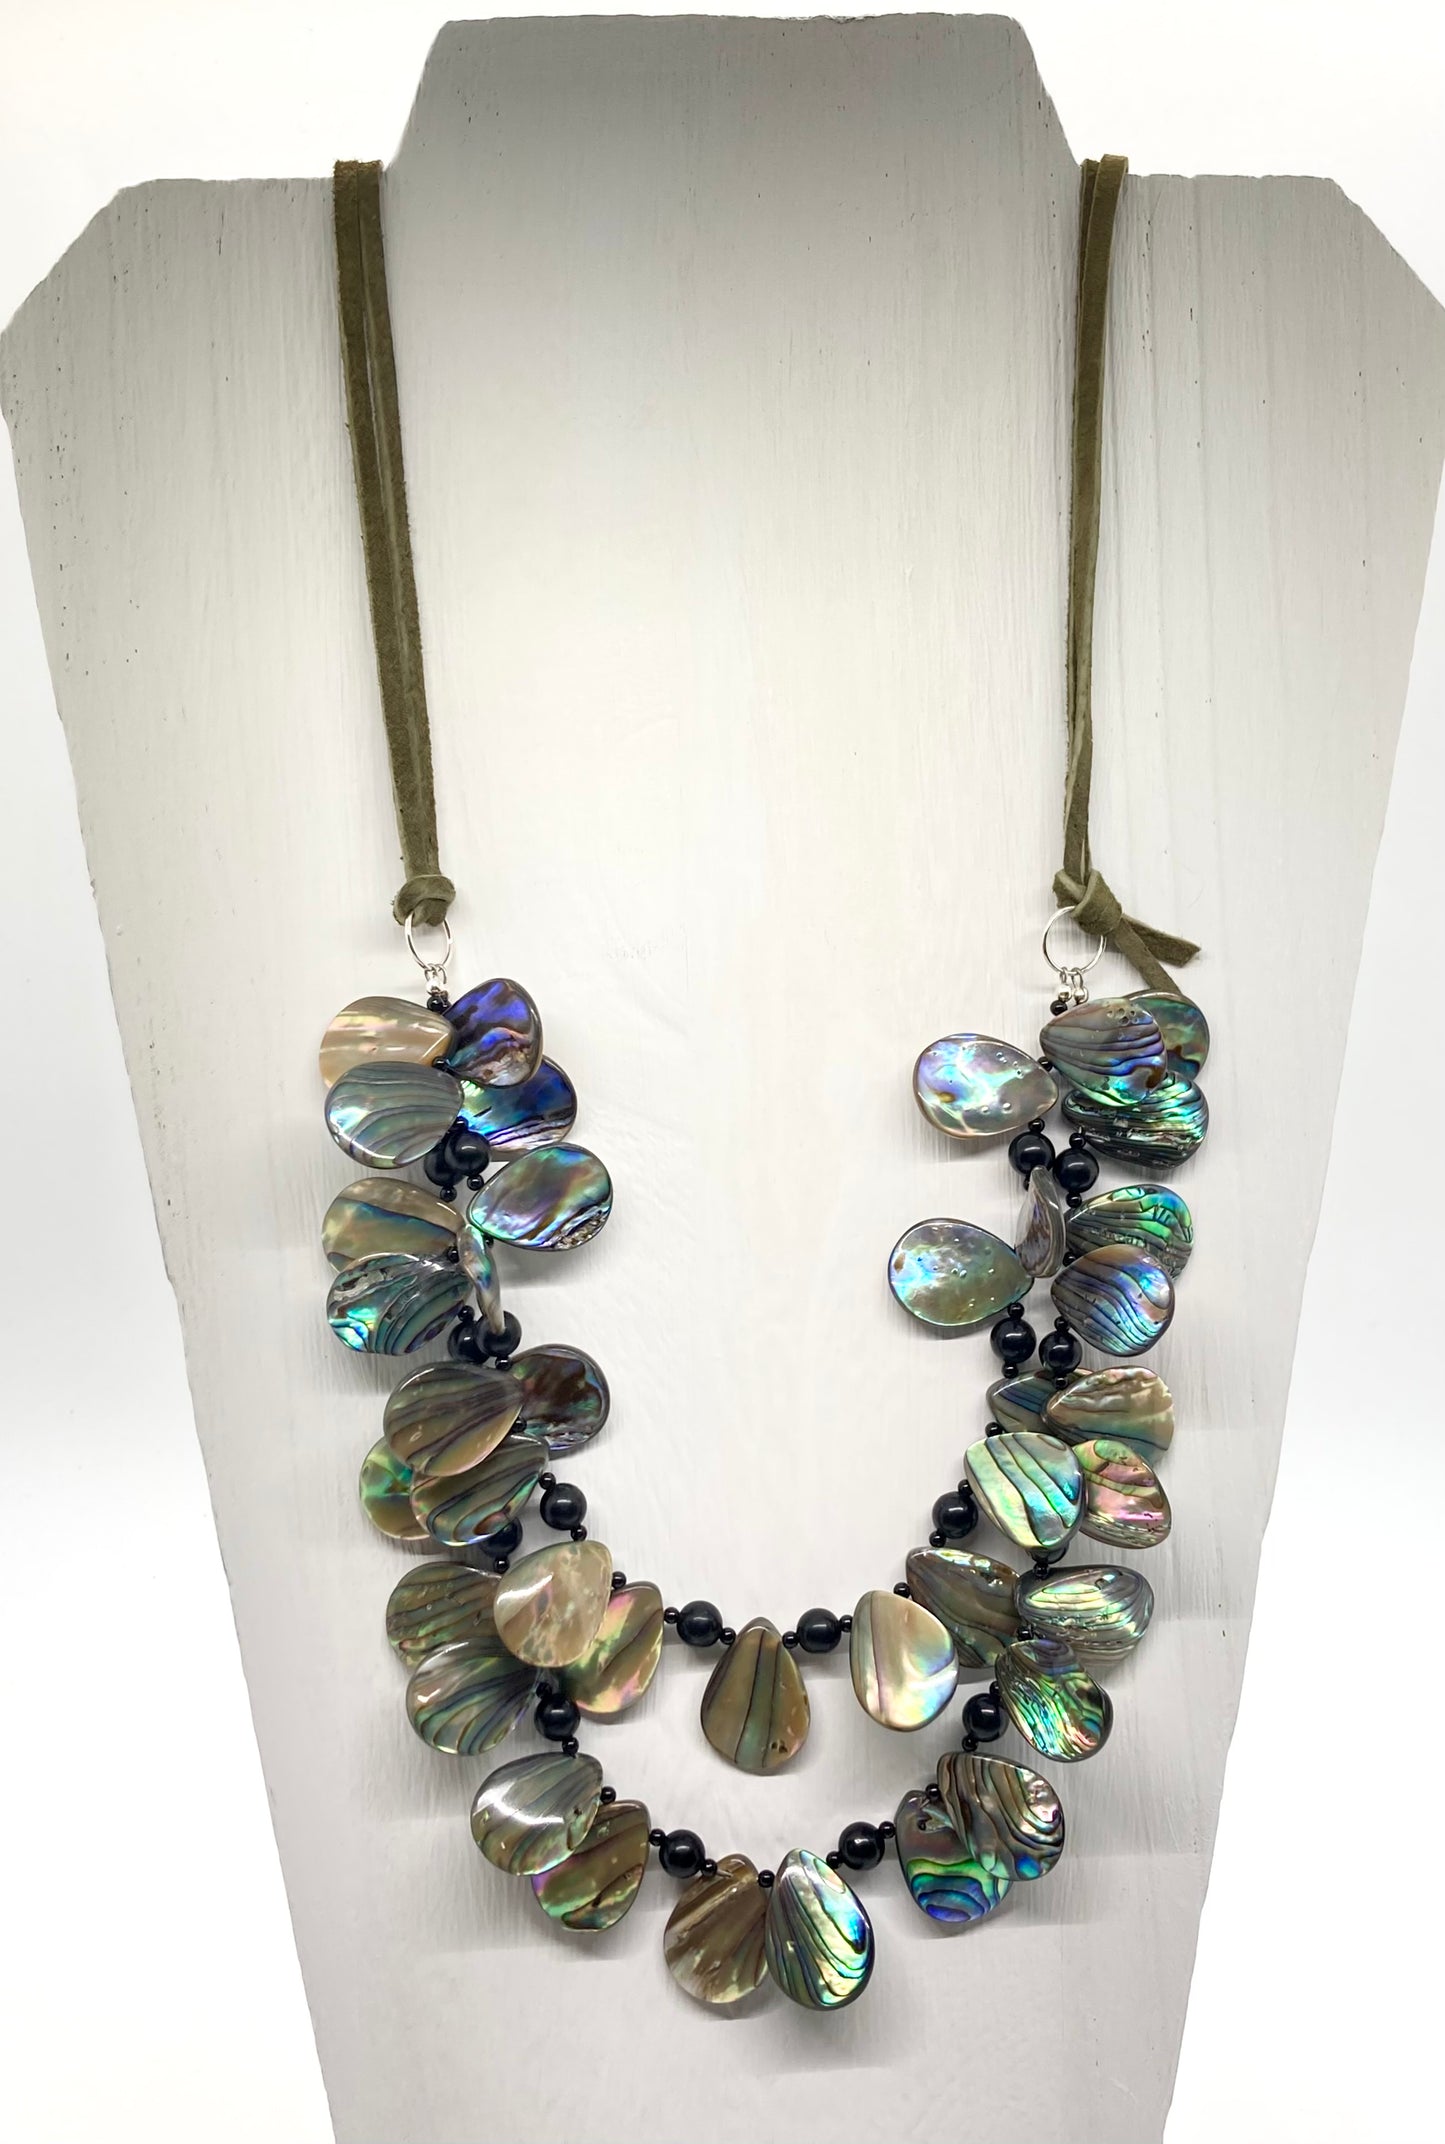 Spotless Necklace with Abalone and Onyx